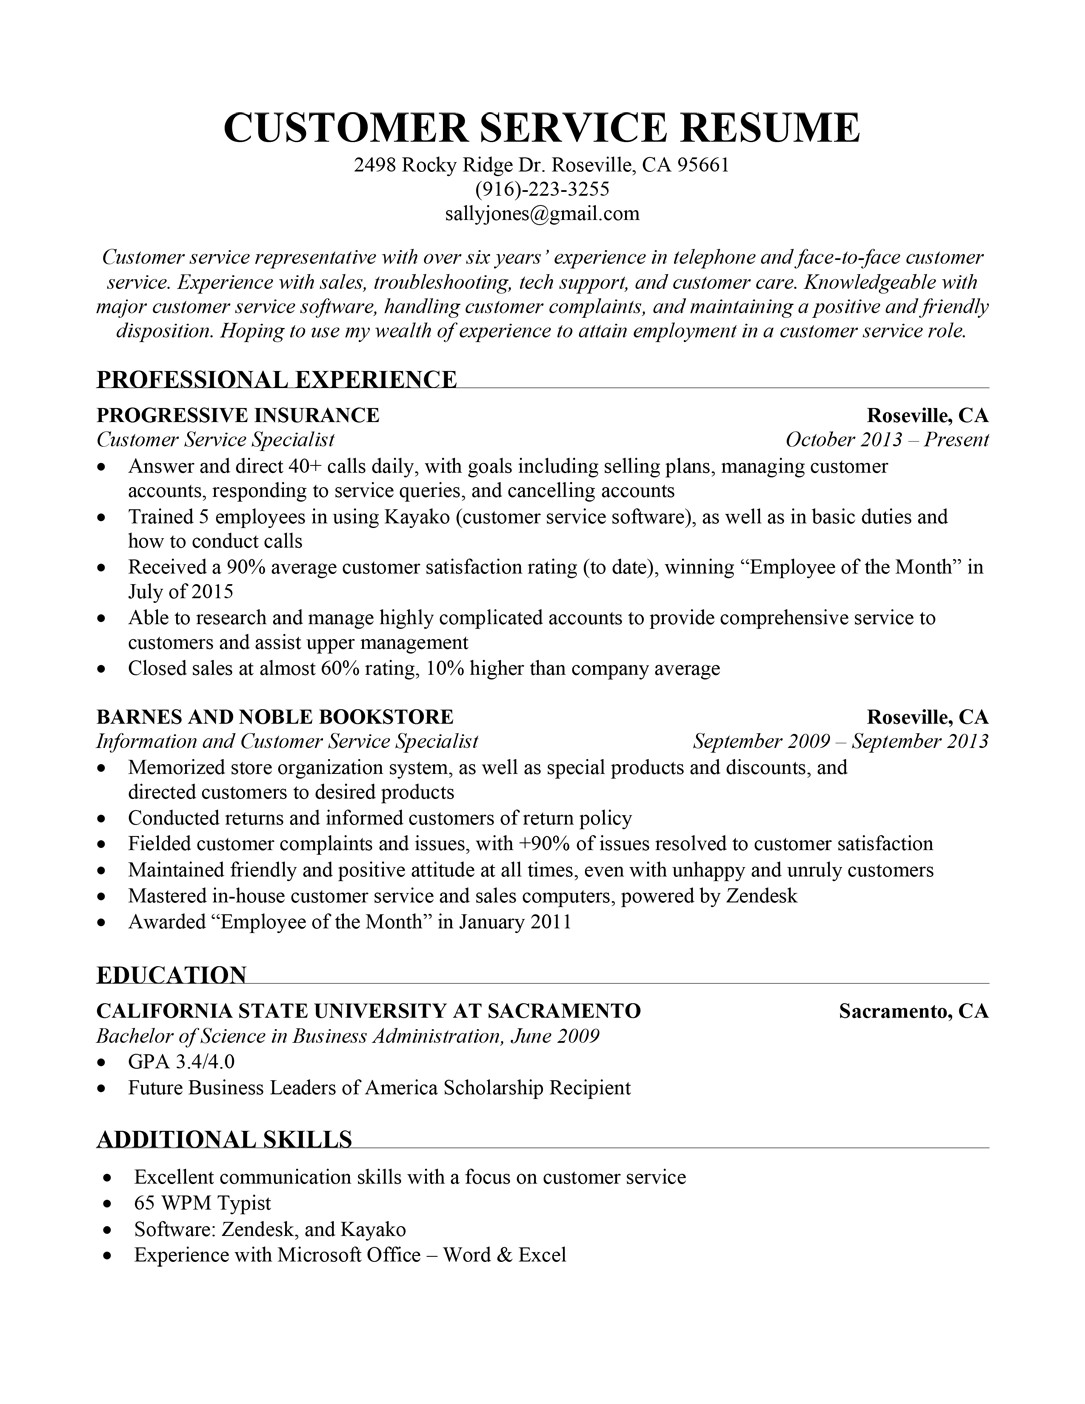 Professional Summary Resume Sample for Customer Service Customer Service Resume Sample Resume Panion